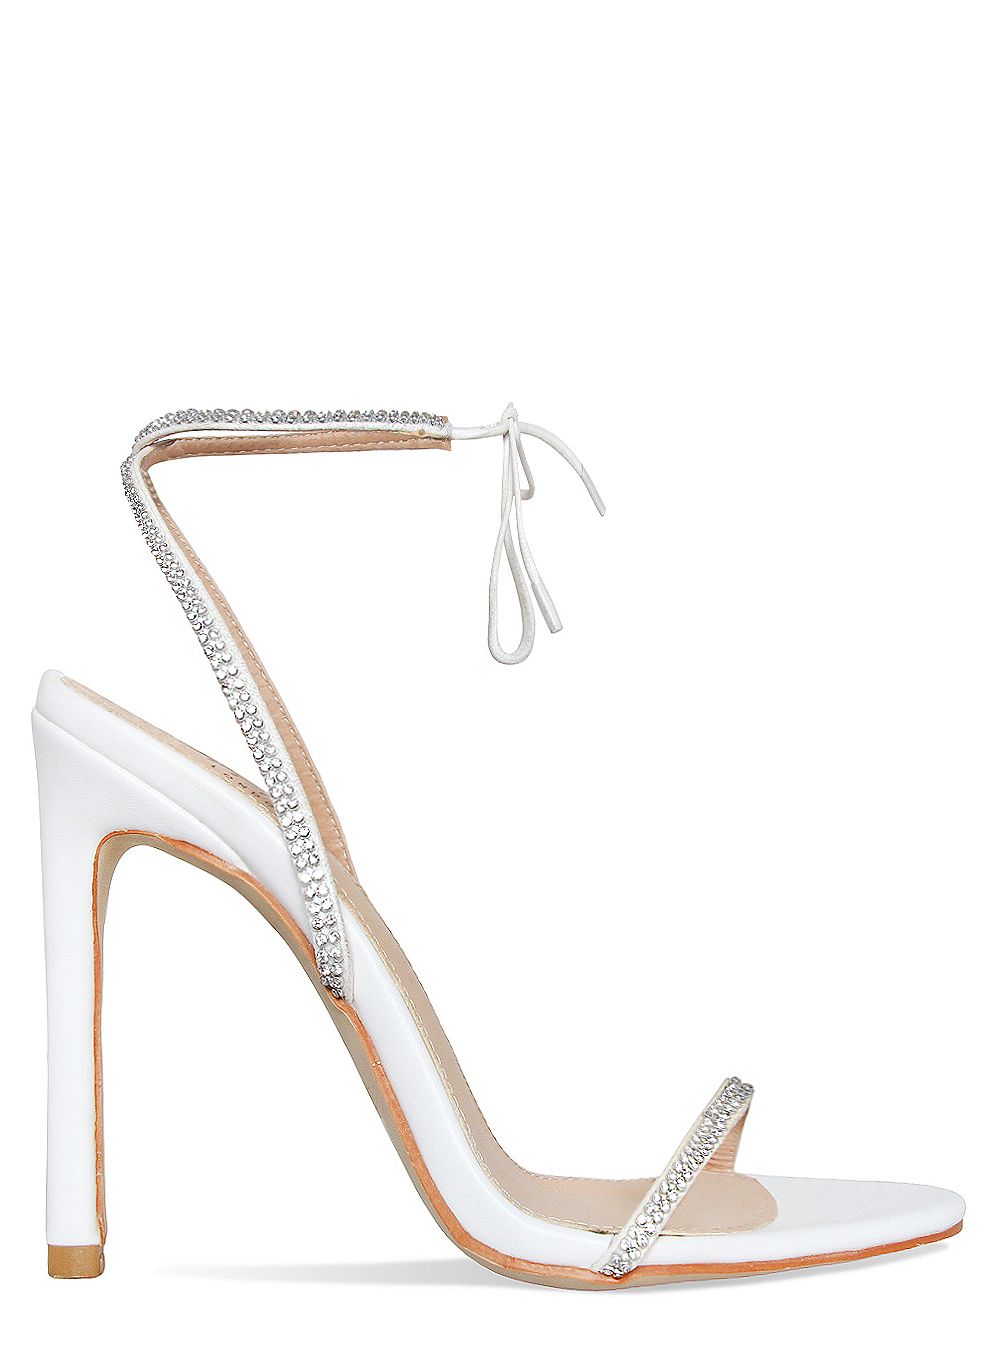 White Diamante Barely There Lace Up Heels